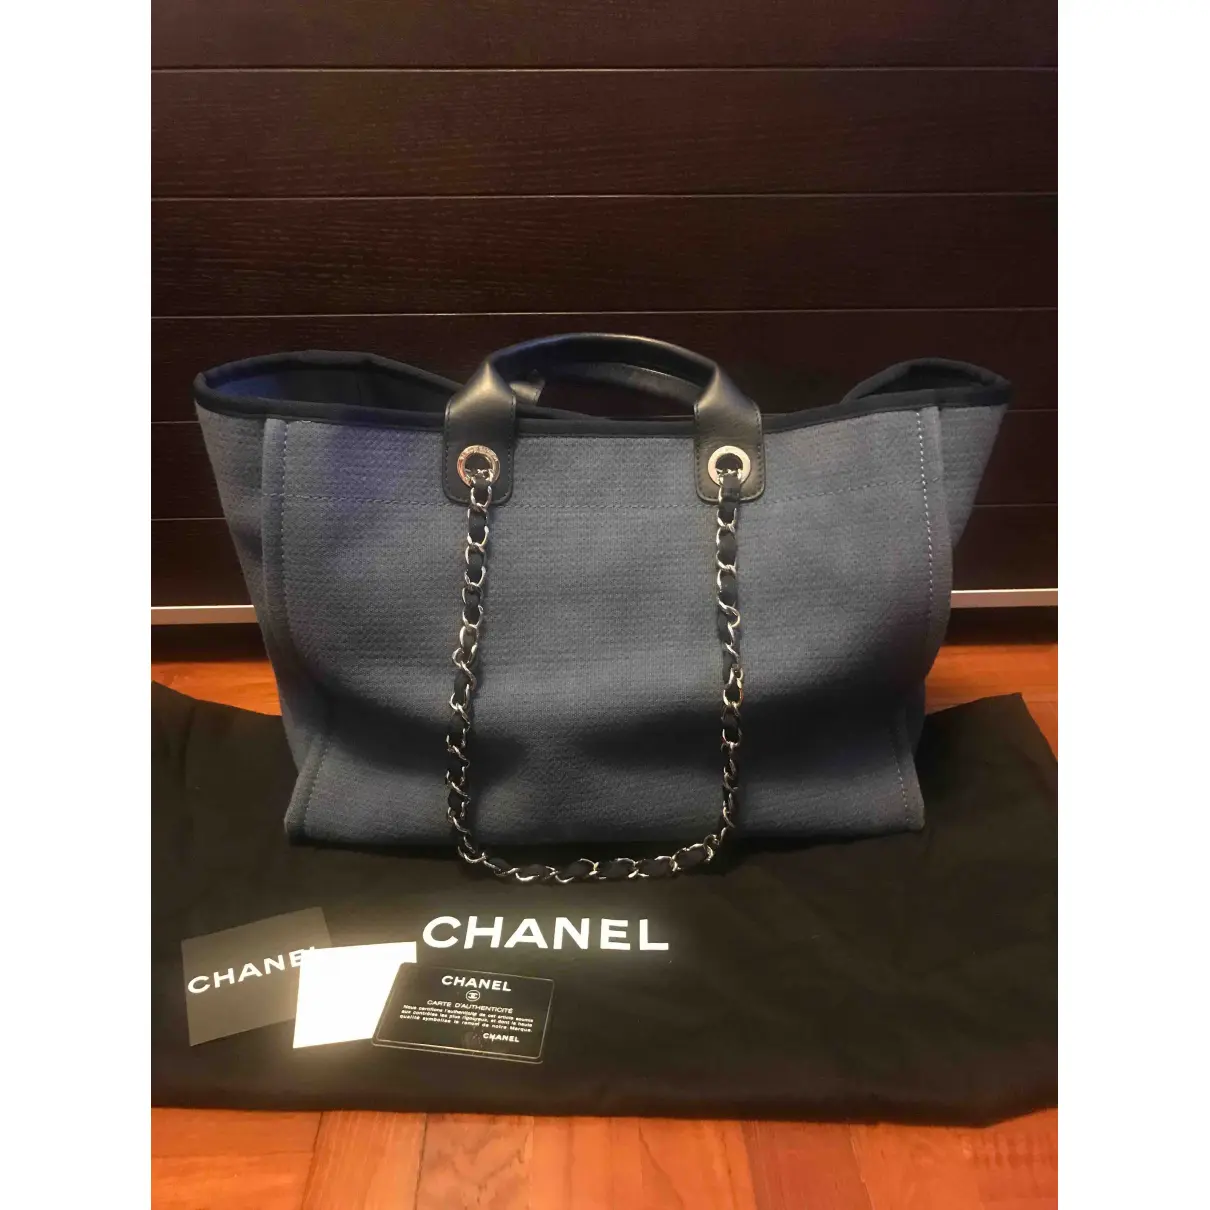 Buy Chanel Deauville cloth tote online